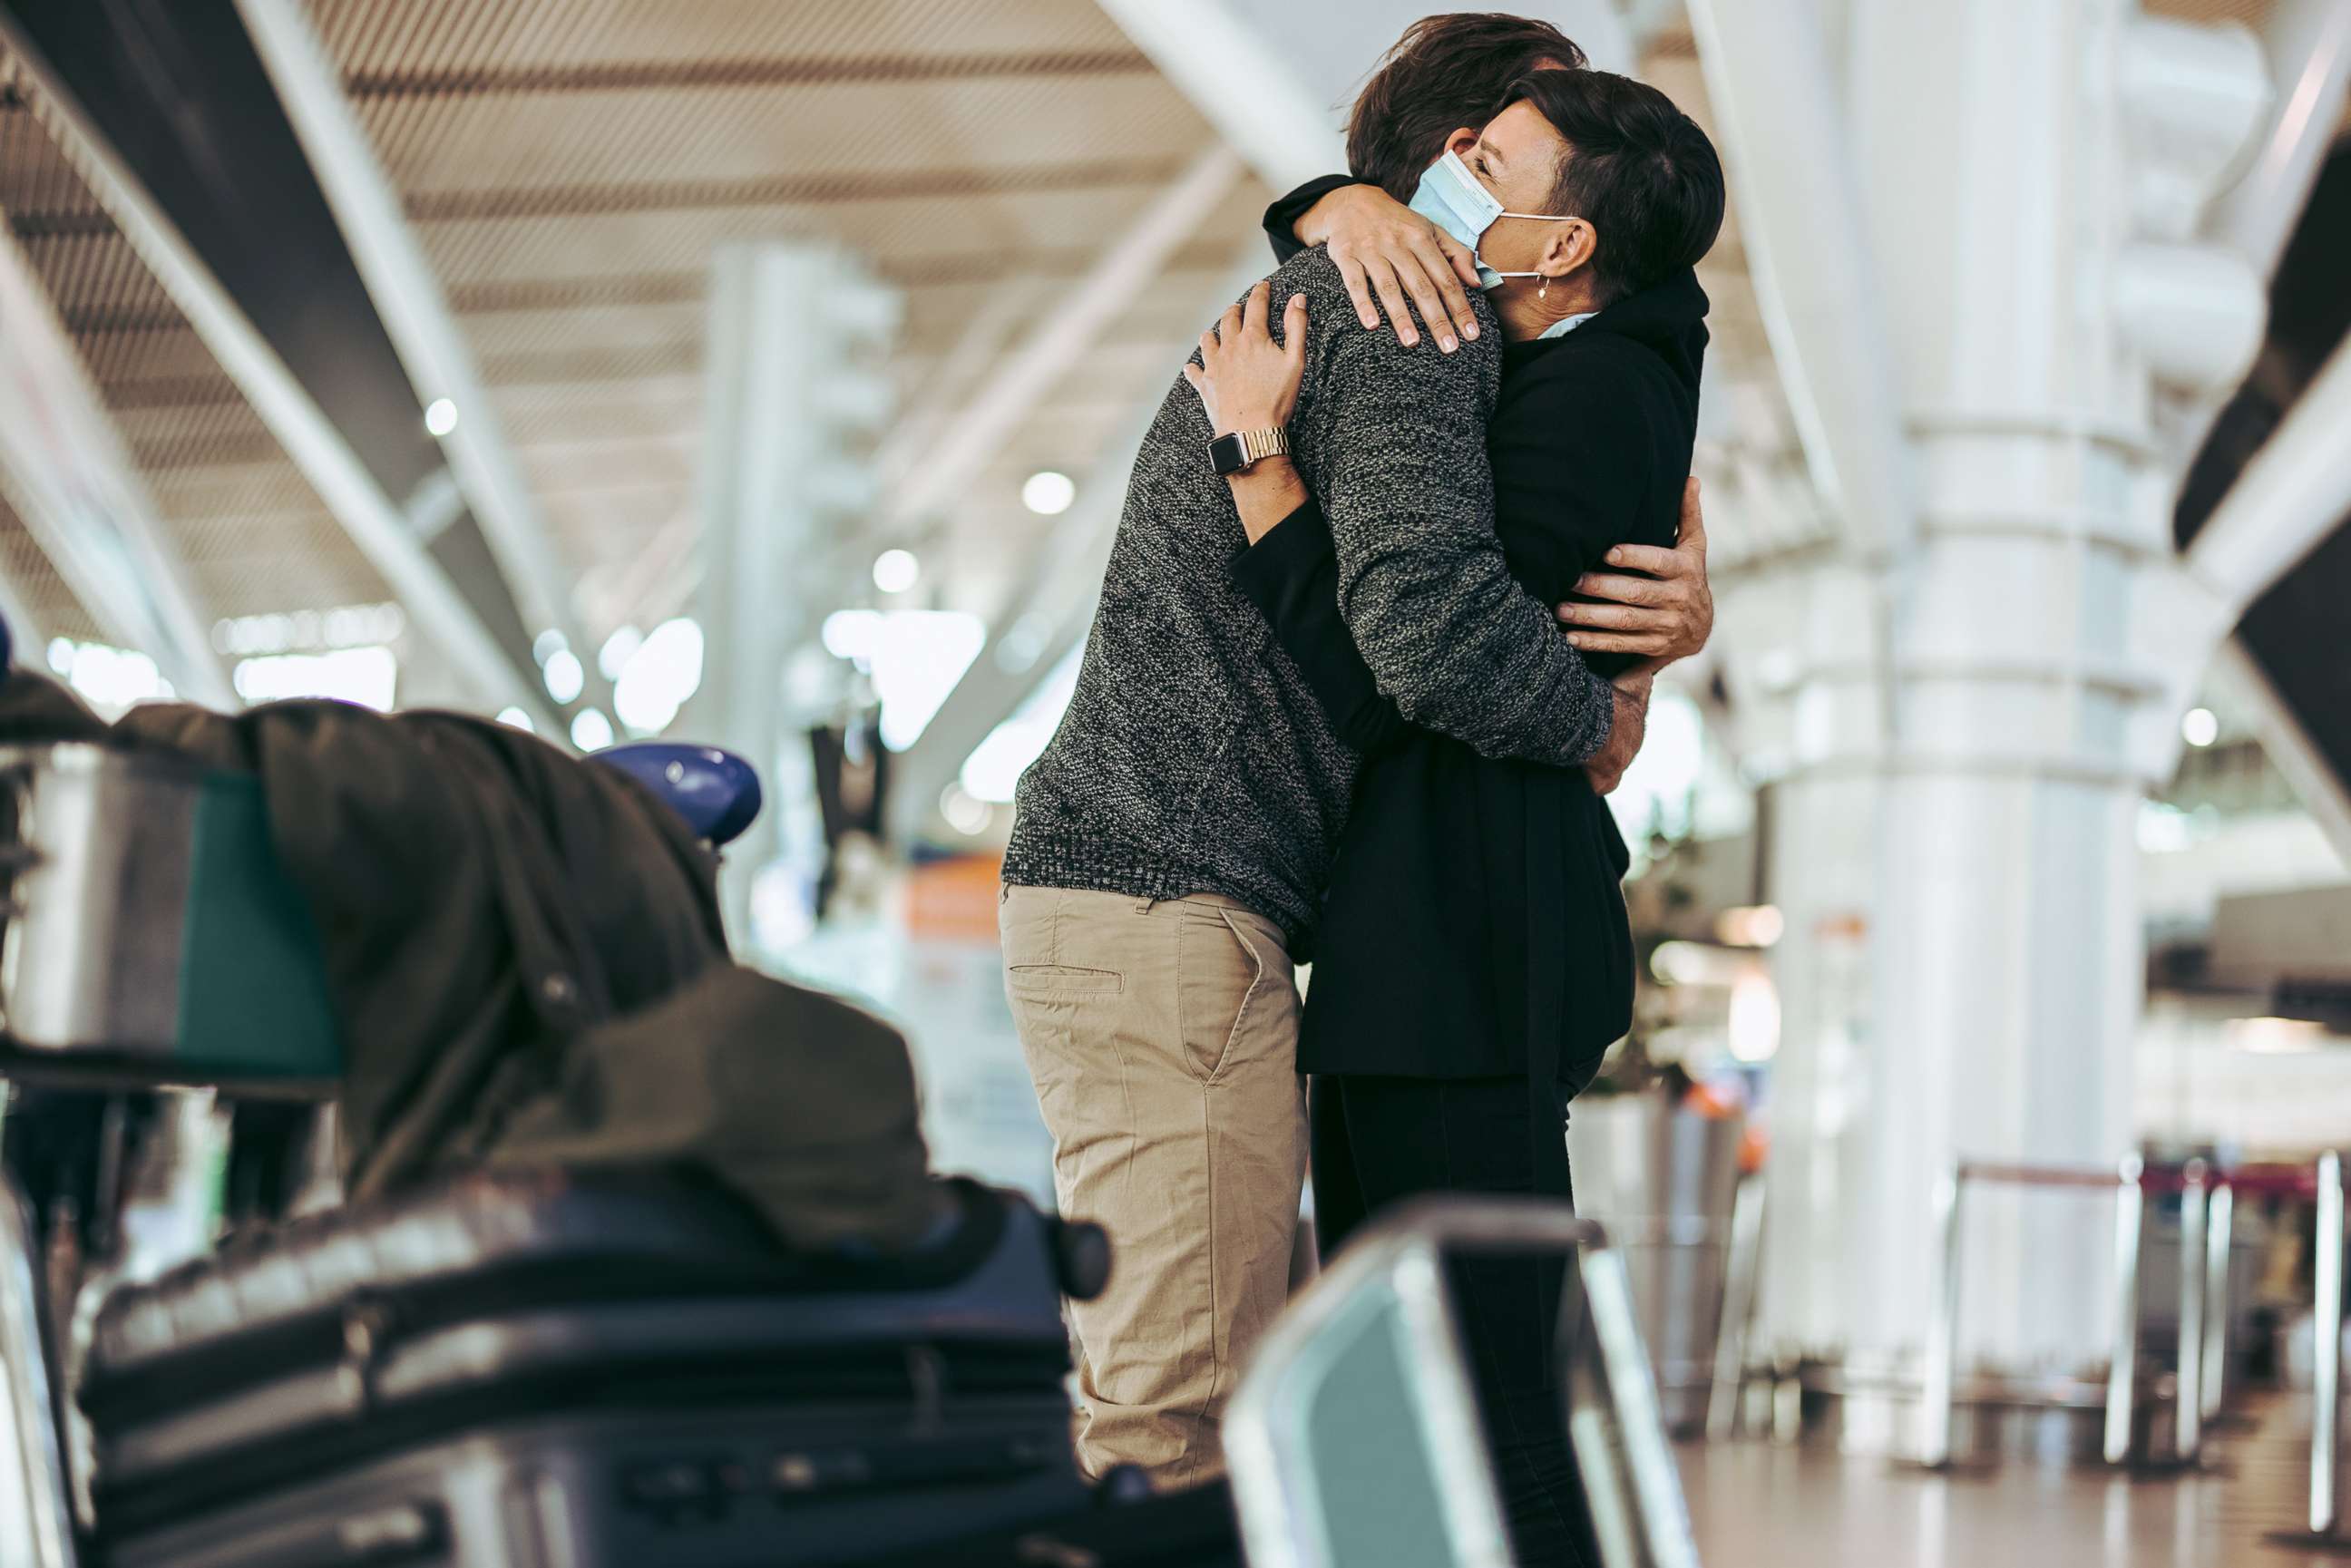 PHOTO: Stock photo of couple hugging at airport.